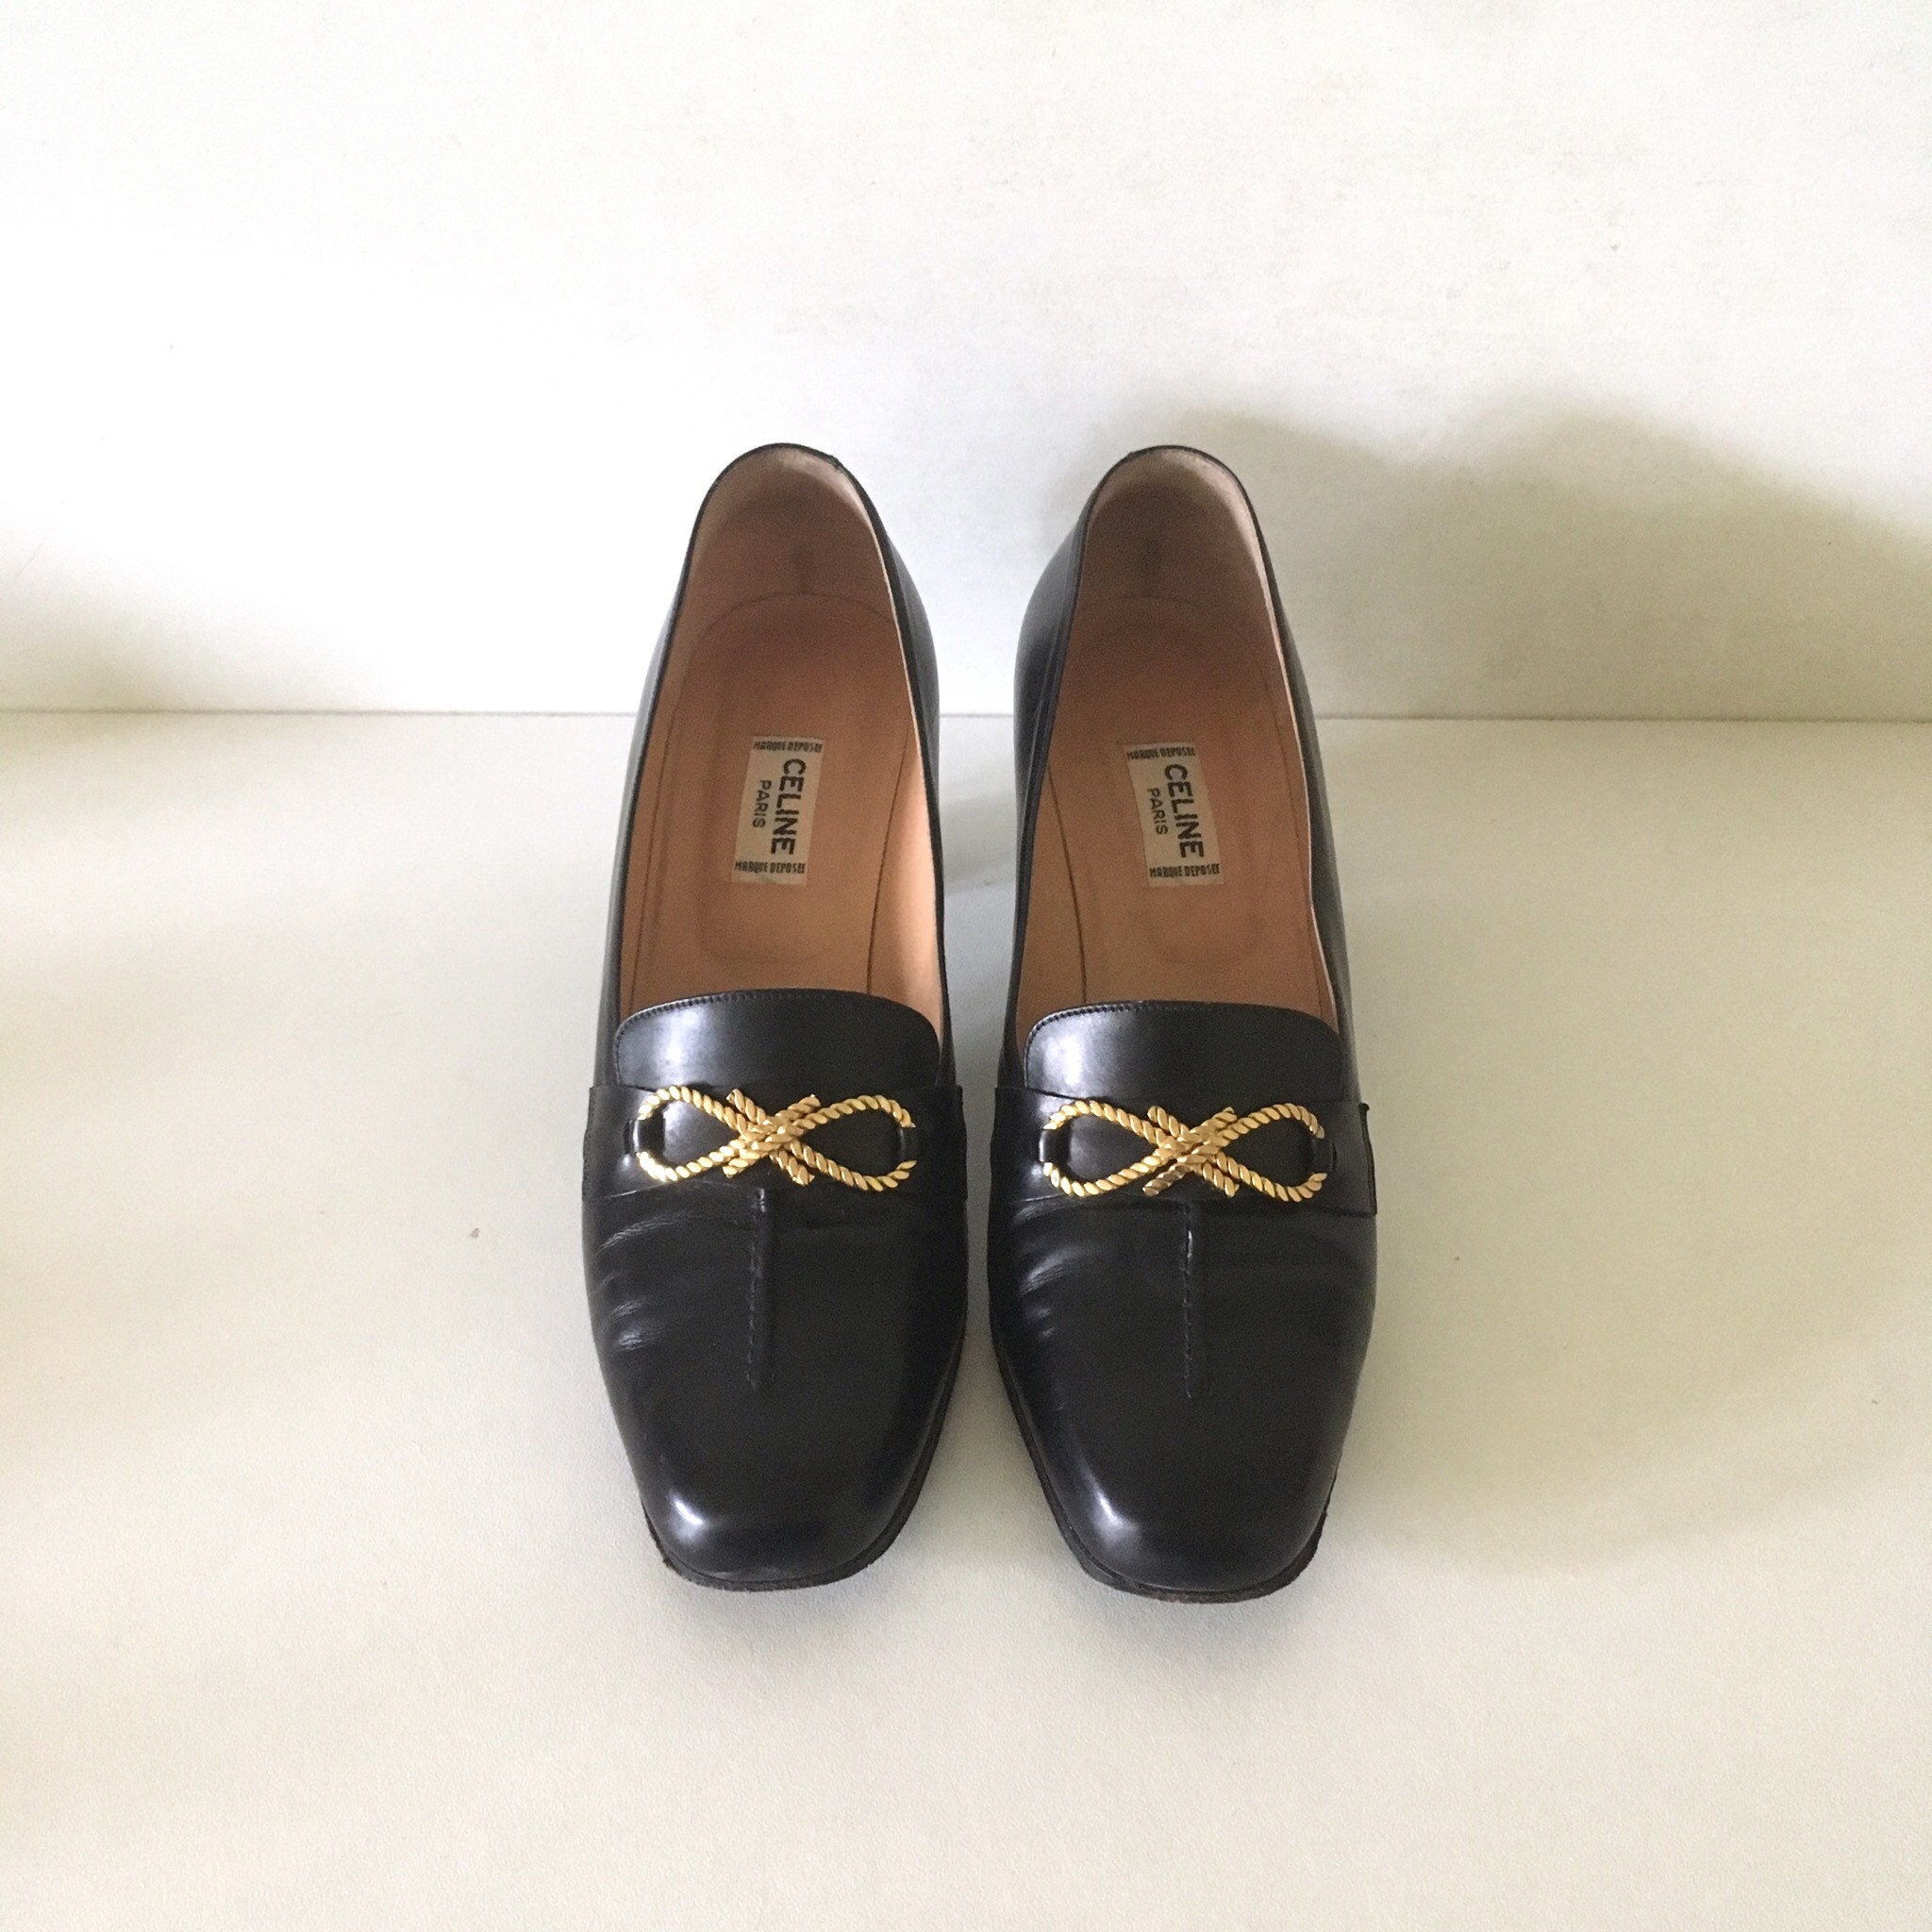 CELINE Black Leather and Gold Link Chain Heels Loafers Shoes - Etsy